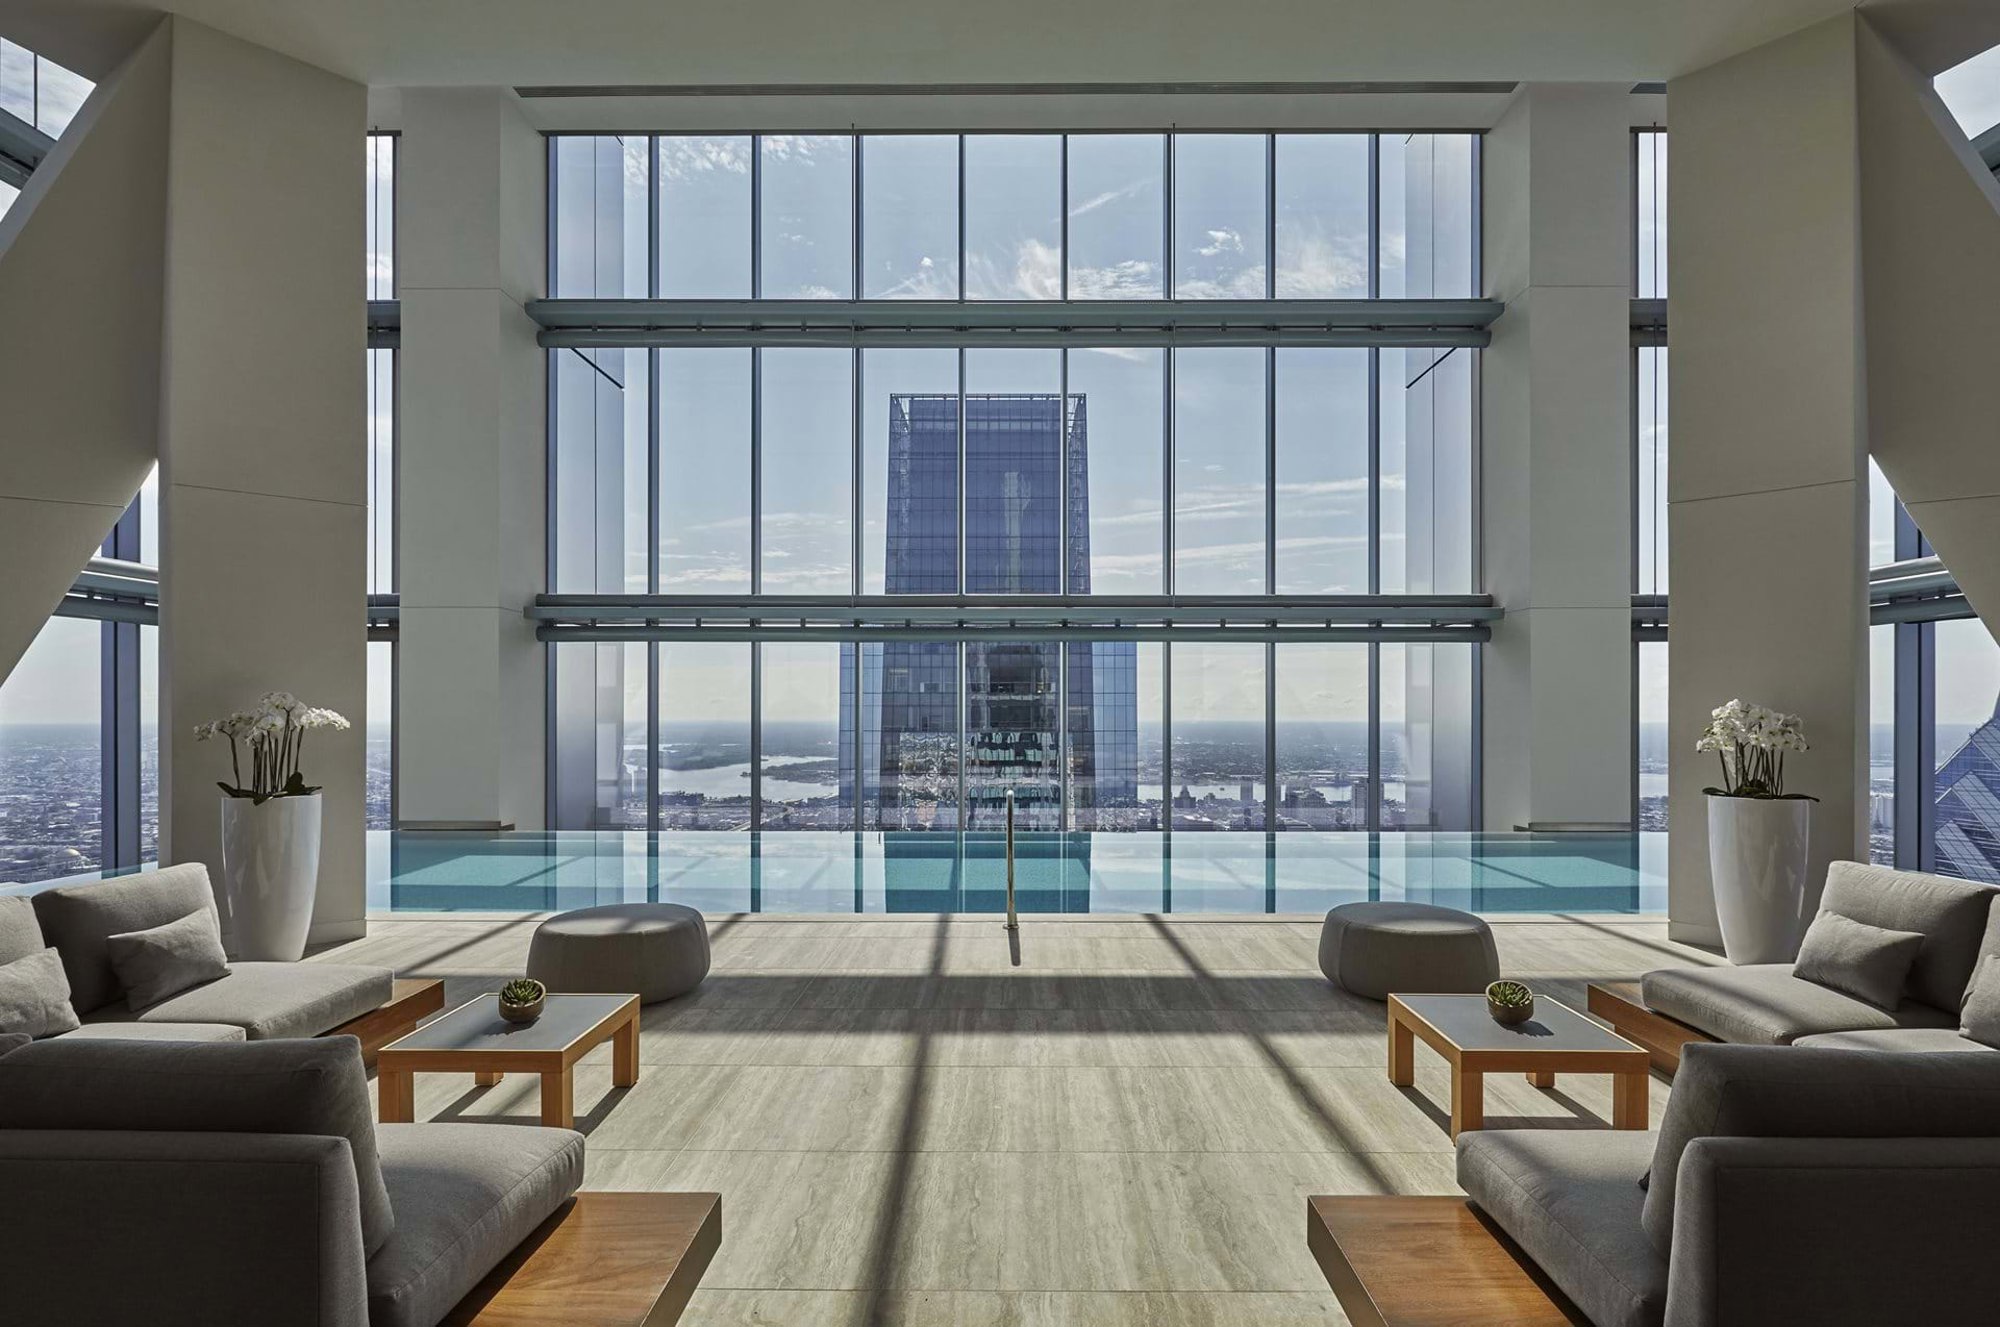 Foster + Partners worked in collaboration with Sylvia Sepielli, one of the most famous spa designers in the world, to bring the Four Seasons fitness centre to life. Expansive views to the east connect the infinity pool to the sweeping Delaware River. © Christian Horan Photography